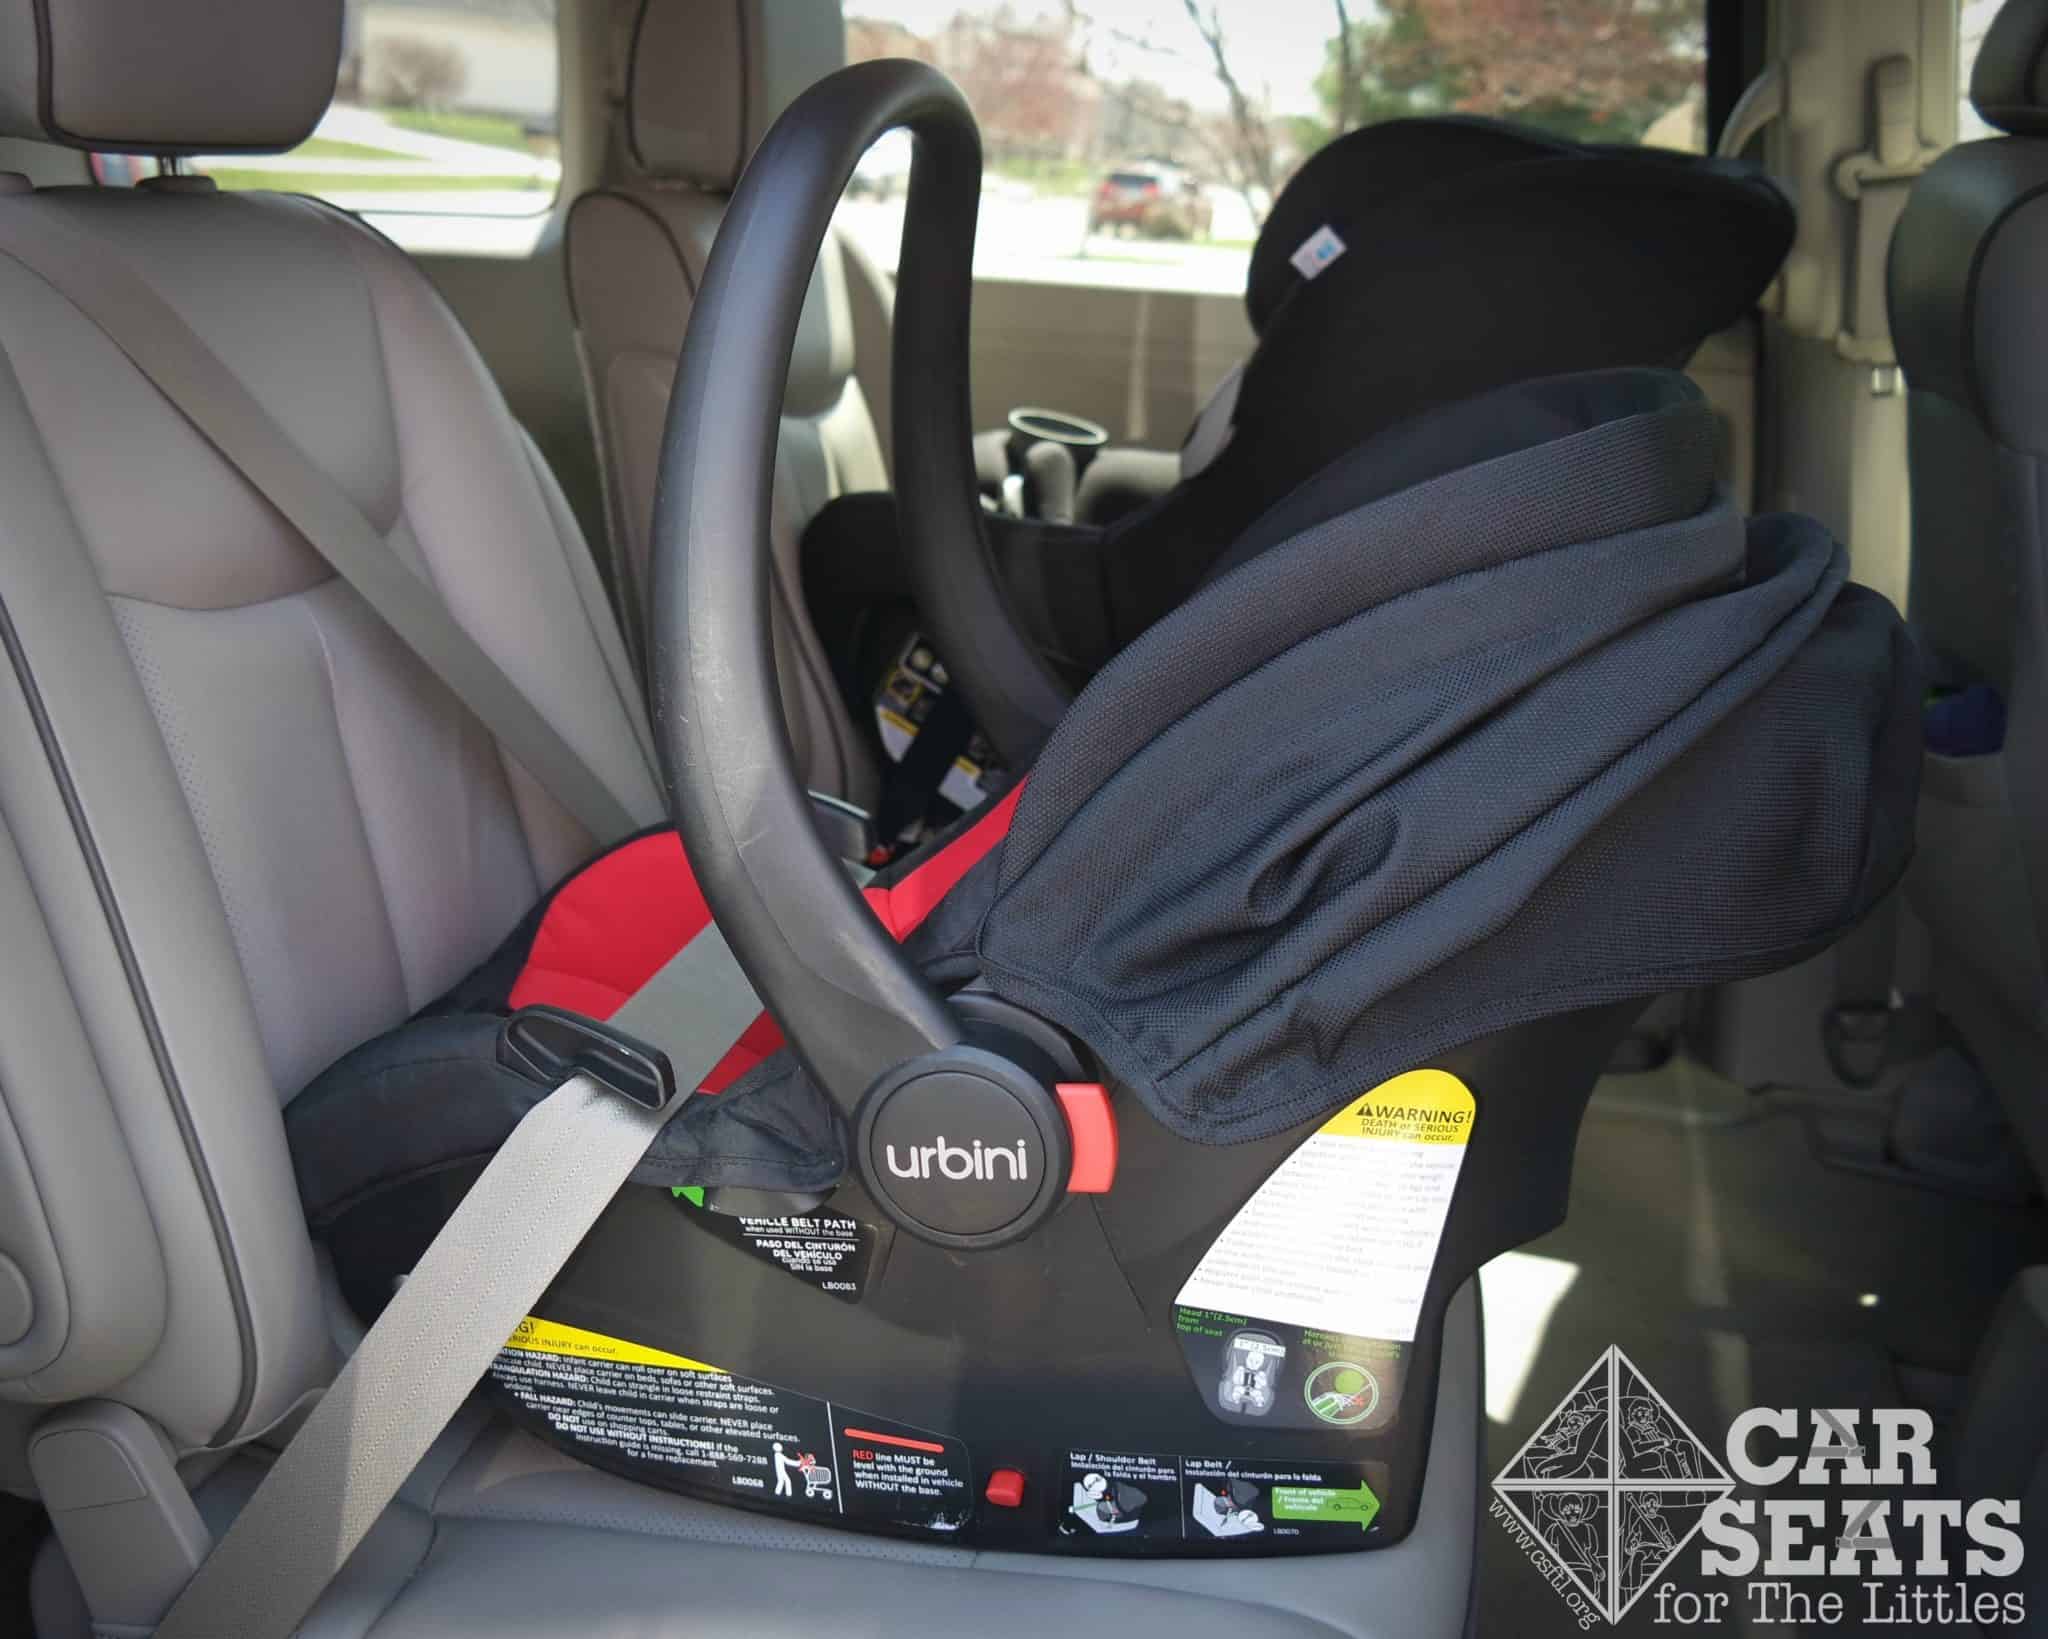 Rear Facing Only Seat Without The Base, How To Install Rear Facing Baby Car Seat With Seatbelt